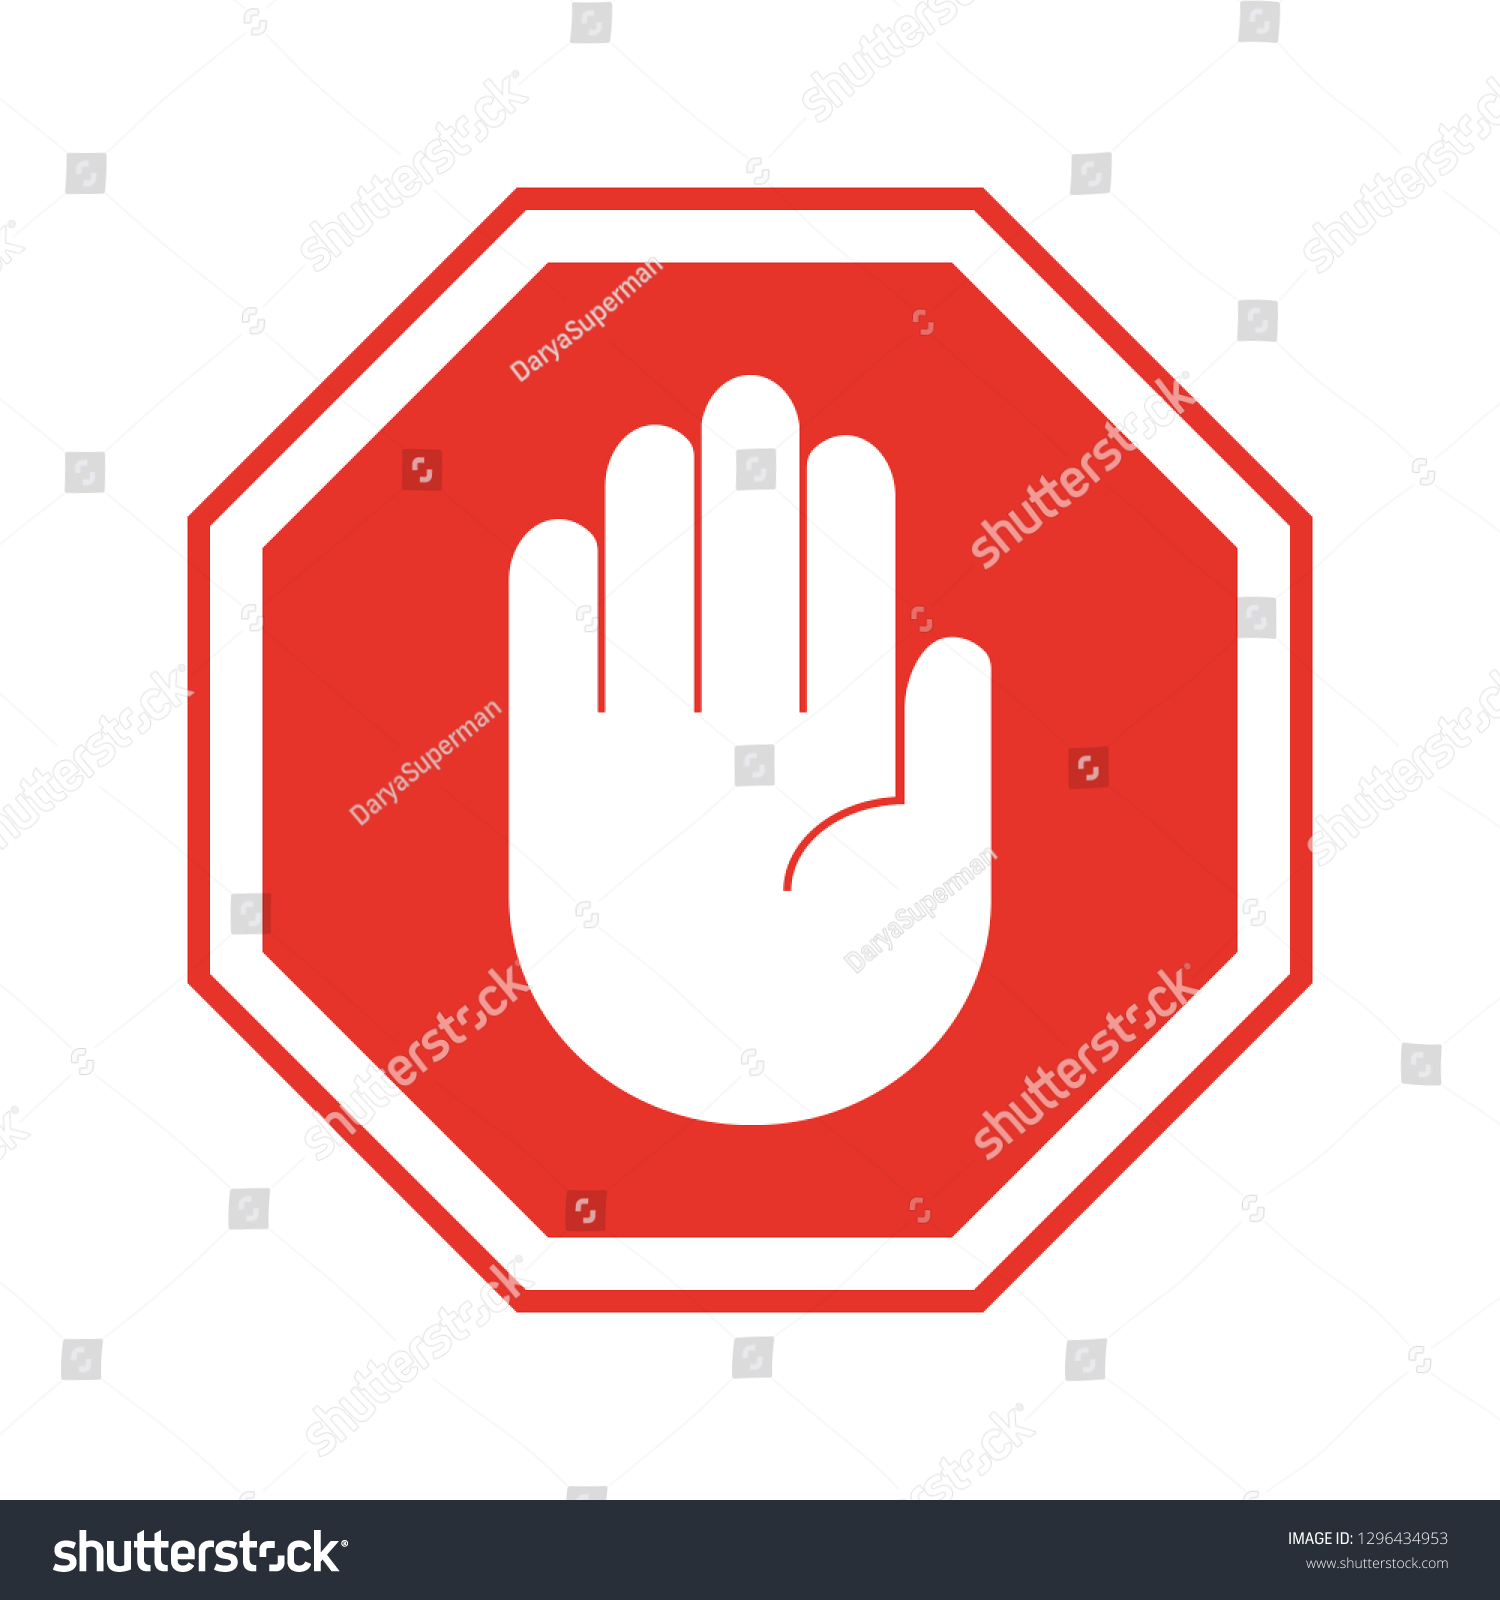 SVG of stop icon. red octagonal sign with open palm, hand, on white background. prohibition, taboo, danger.   vector illustration. svg